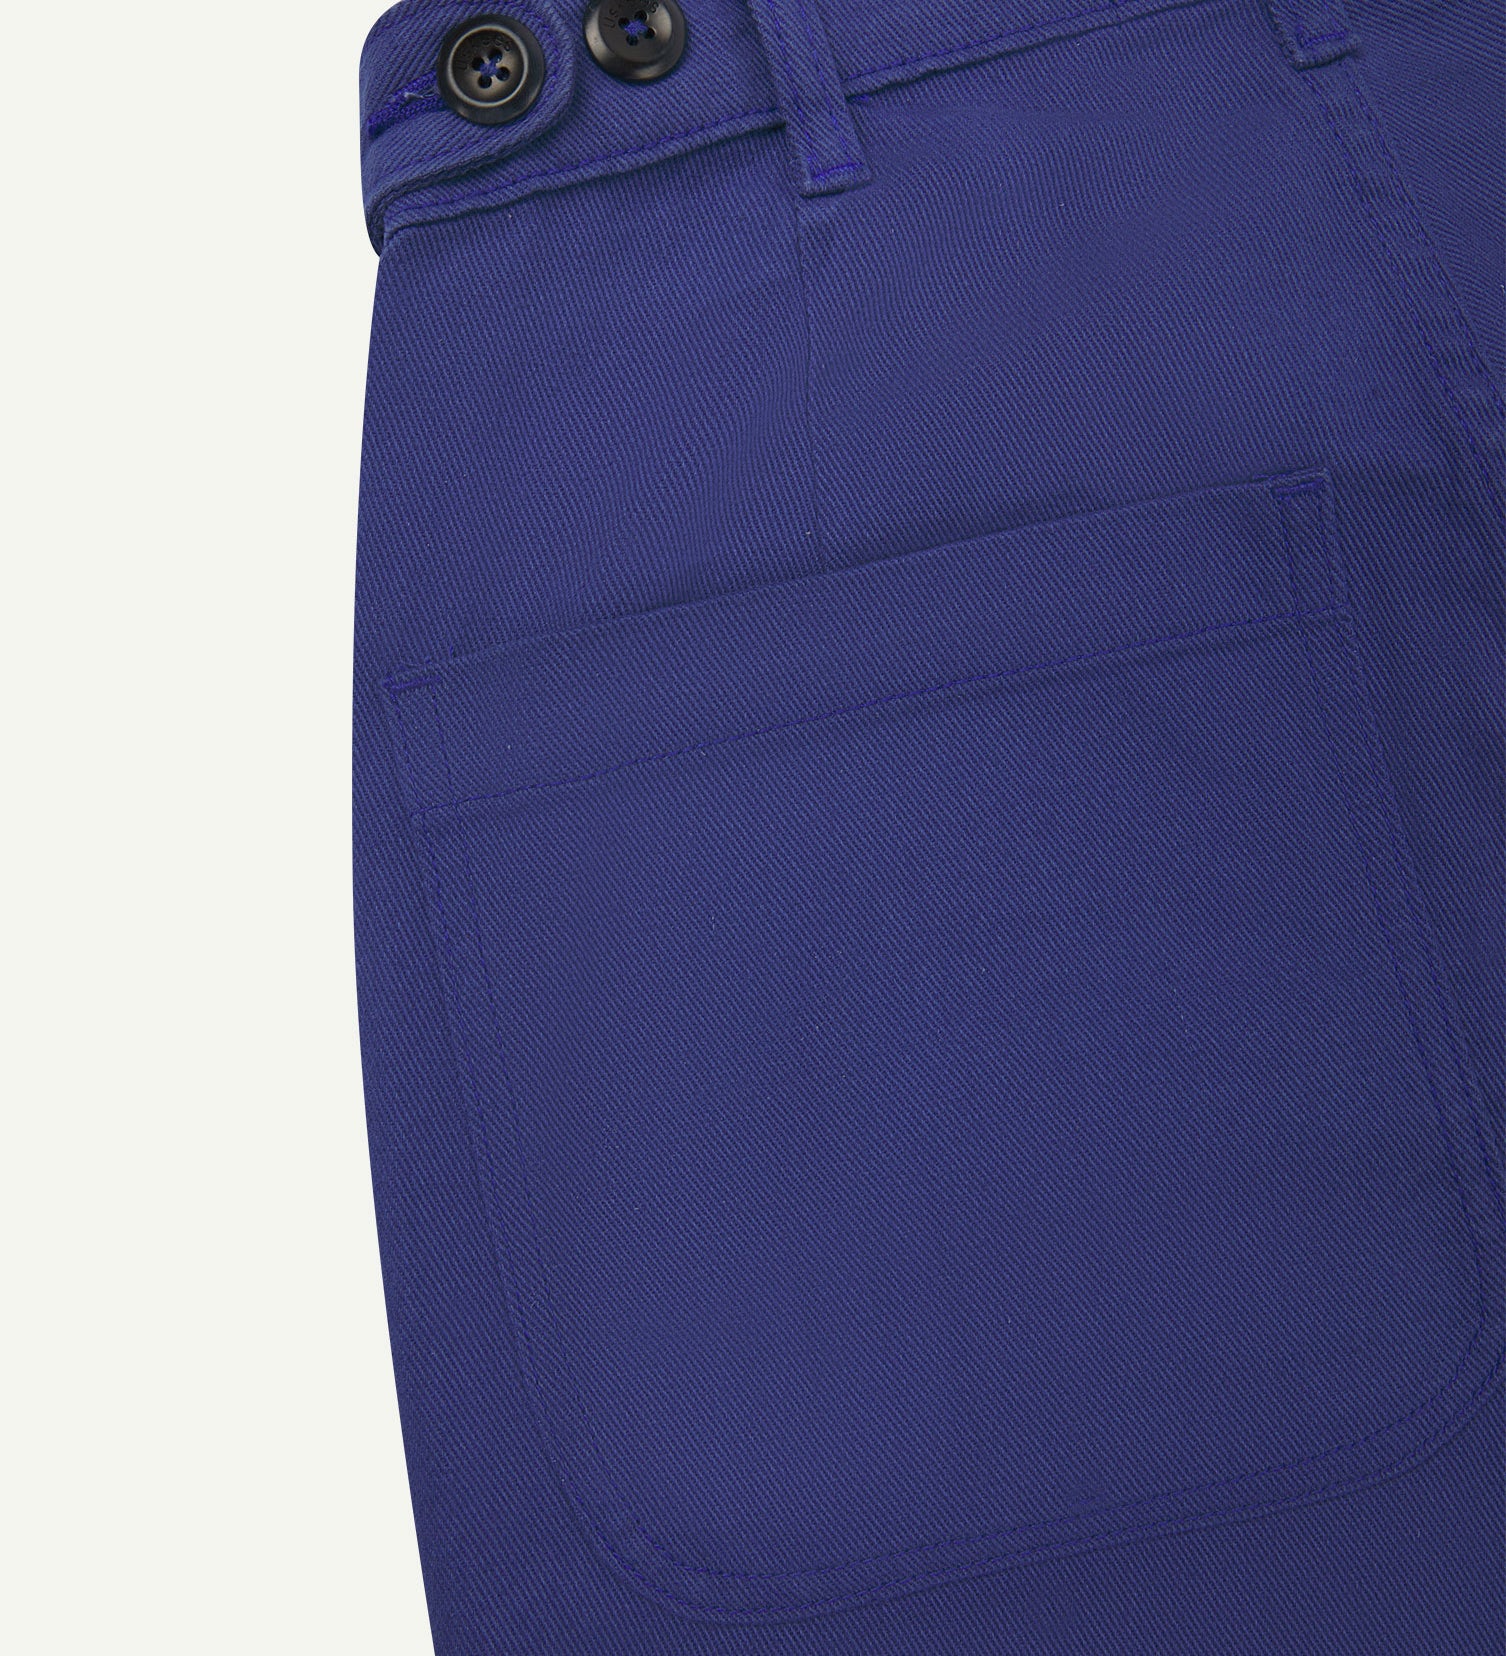 Back close-up of 5013 Uskees drill straight leg pants in ultra blue, with focus on left rear pocket, belt loops and adjustable waistband with corozo buttons.